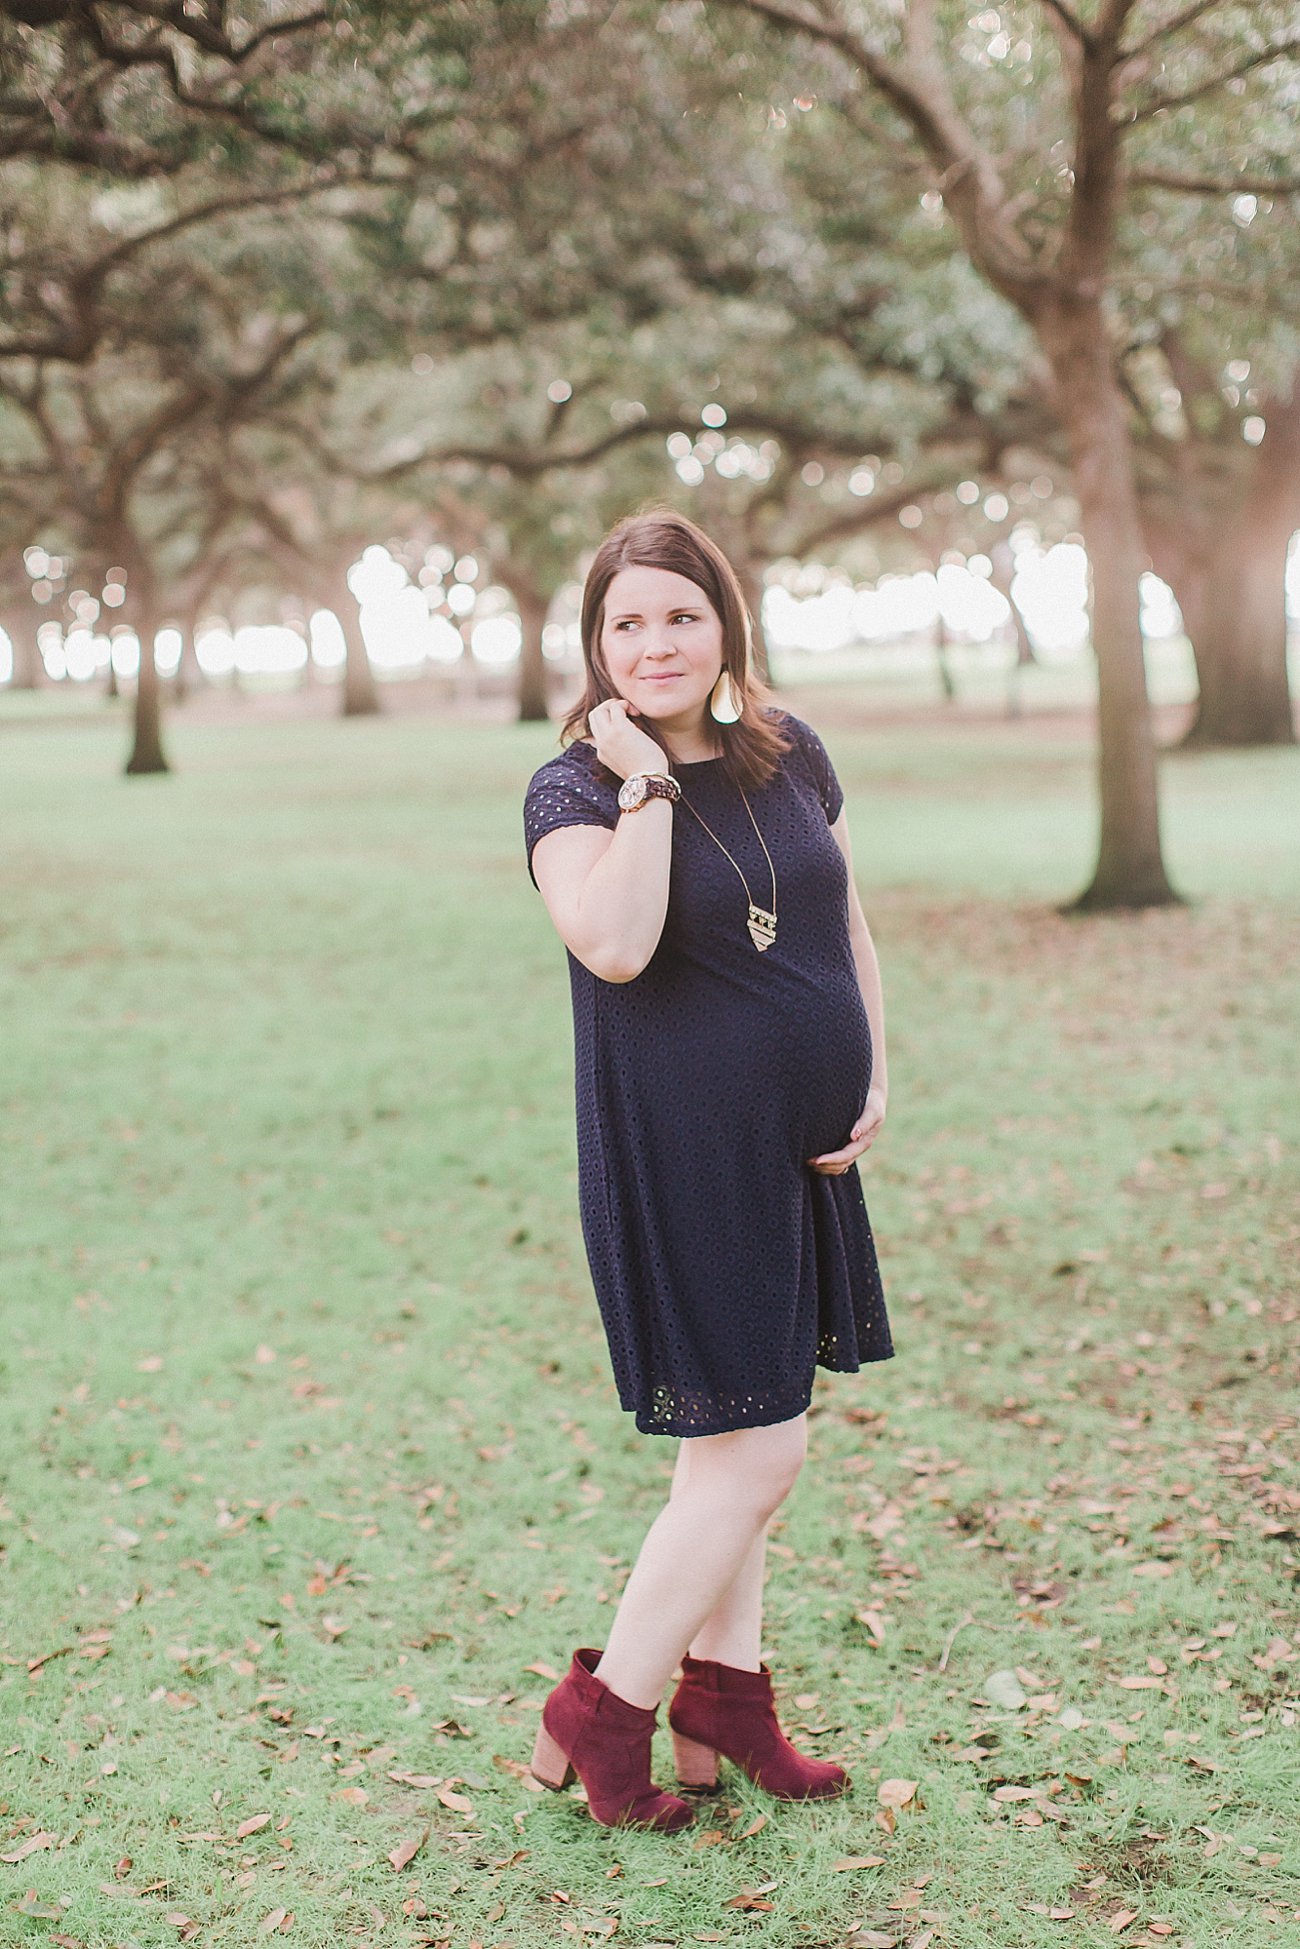 Stitch Fix Ingrid & Isabelle Maternity Dress, Splendid booties, Flourish Market / Mata Traders necklace, Nickel and Suede signature gold earrings - Maternity Style - Charleston, South Carolina Anniversary and Maternity Photography with Annamarie Akins Photography (51)